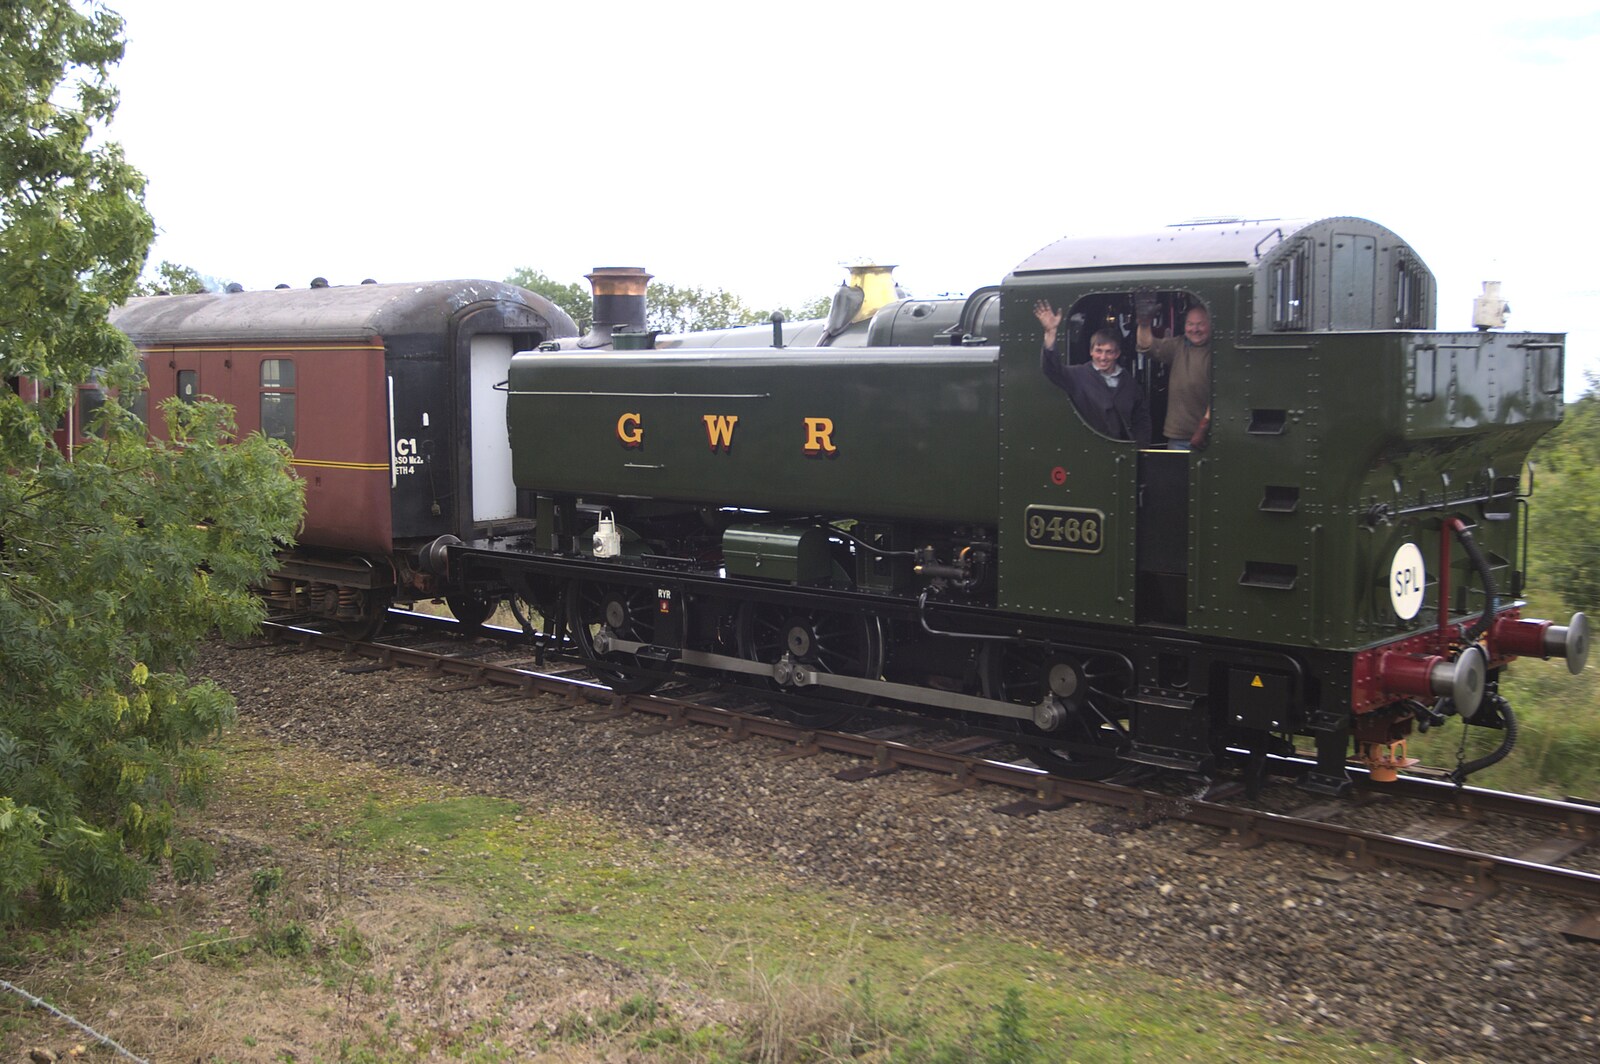 Camping with Trains, Yaxham, Norfolk - 29th August 2010: Hawksworth Pannier 9466 trundles past the campsite